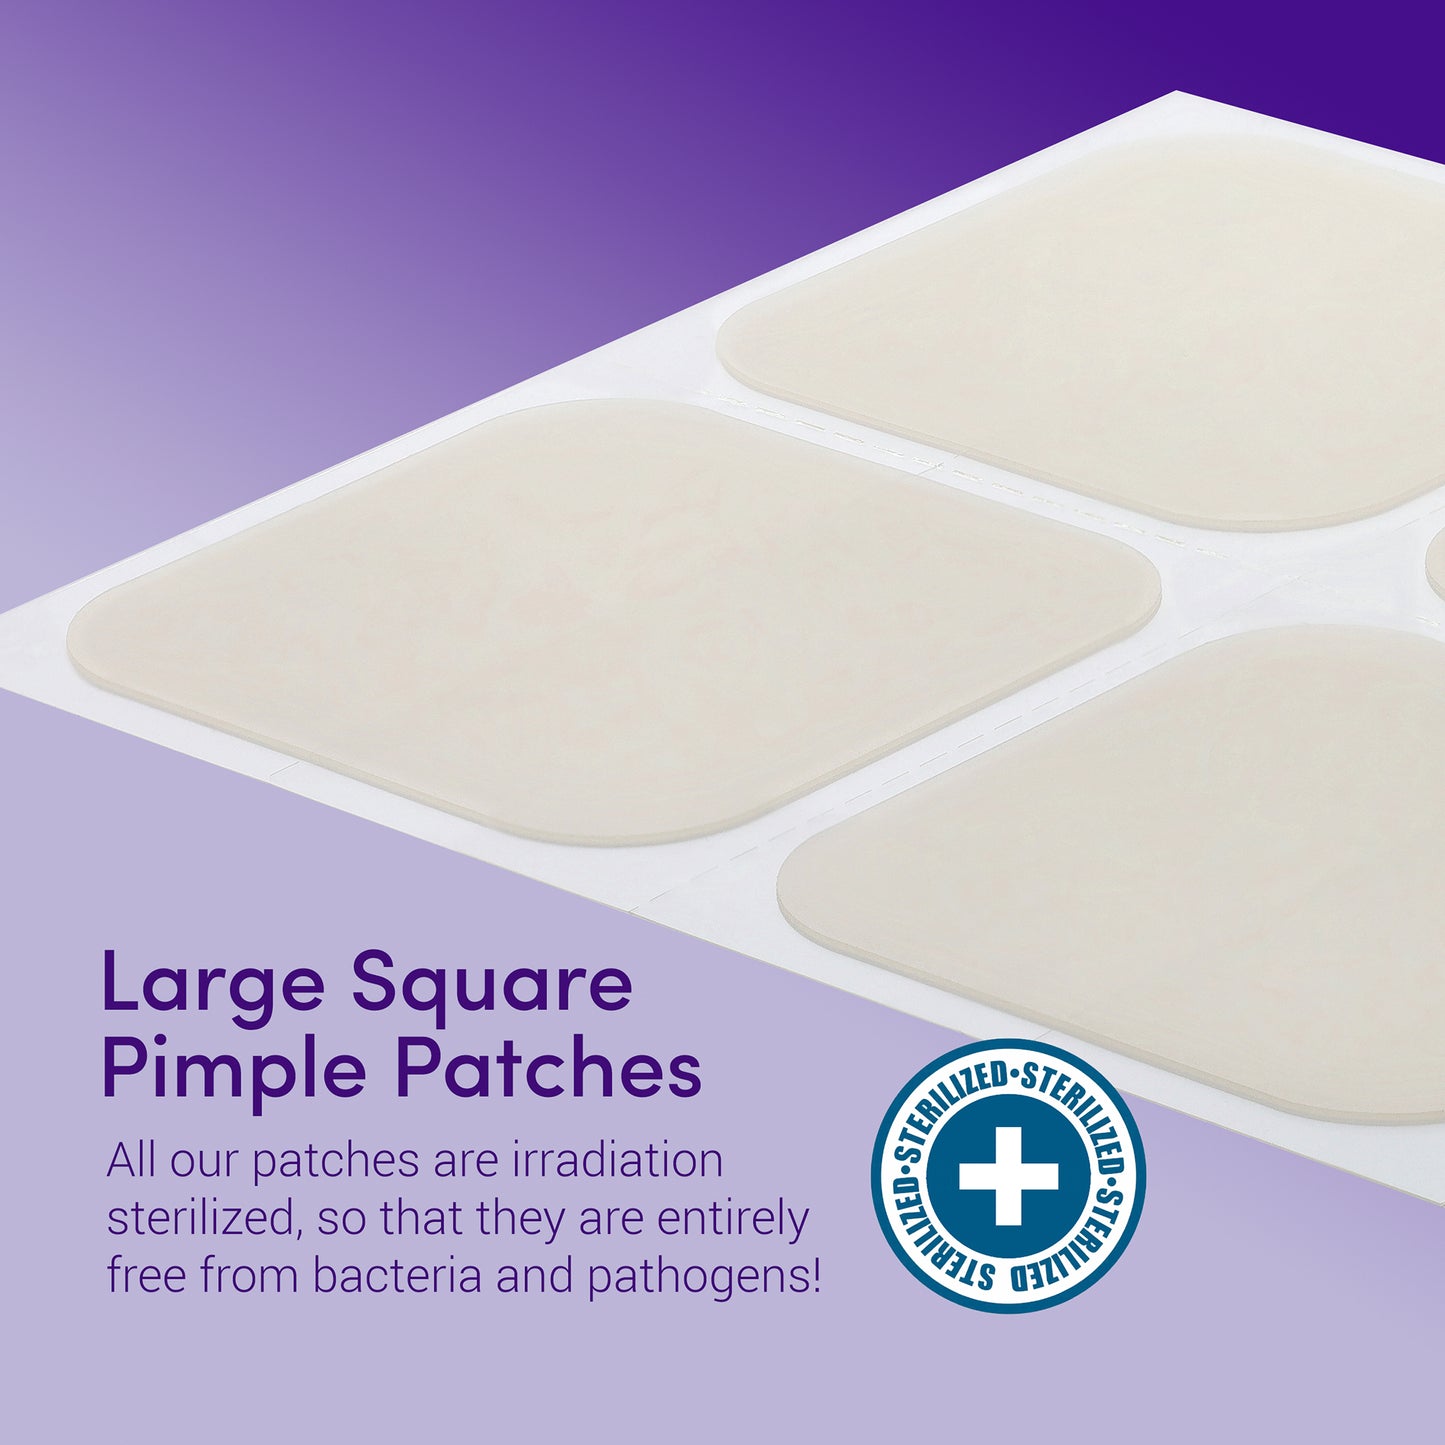 UNNIE™ Derma Acne Pimple Patch - Clear your zits, pimples & pesky acne, in 8 hours, GUARANTEED! (30 Day Supply)